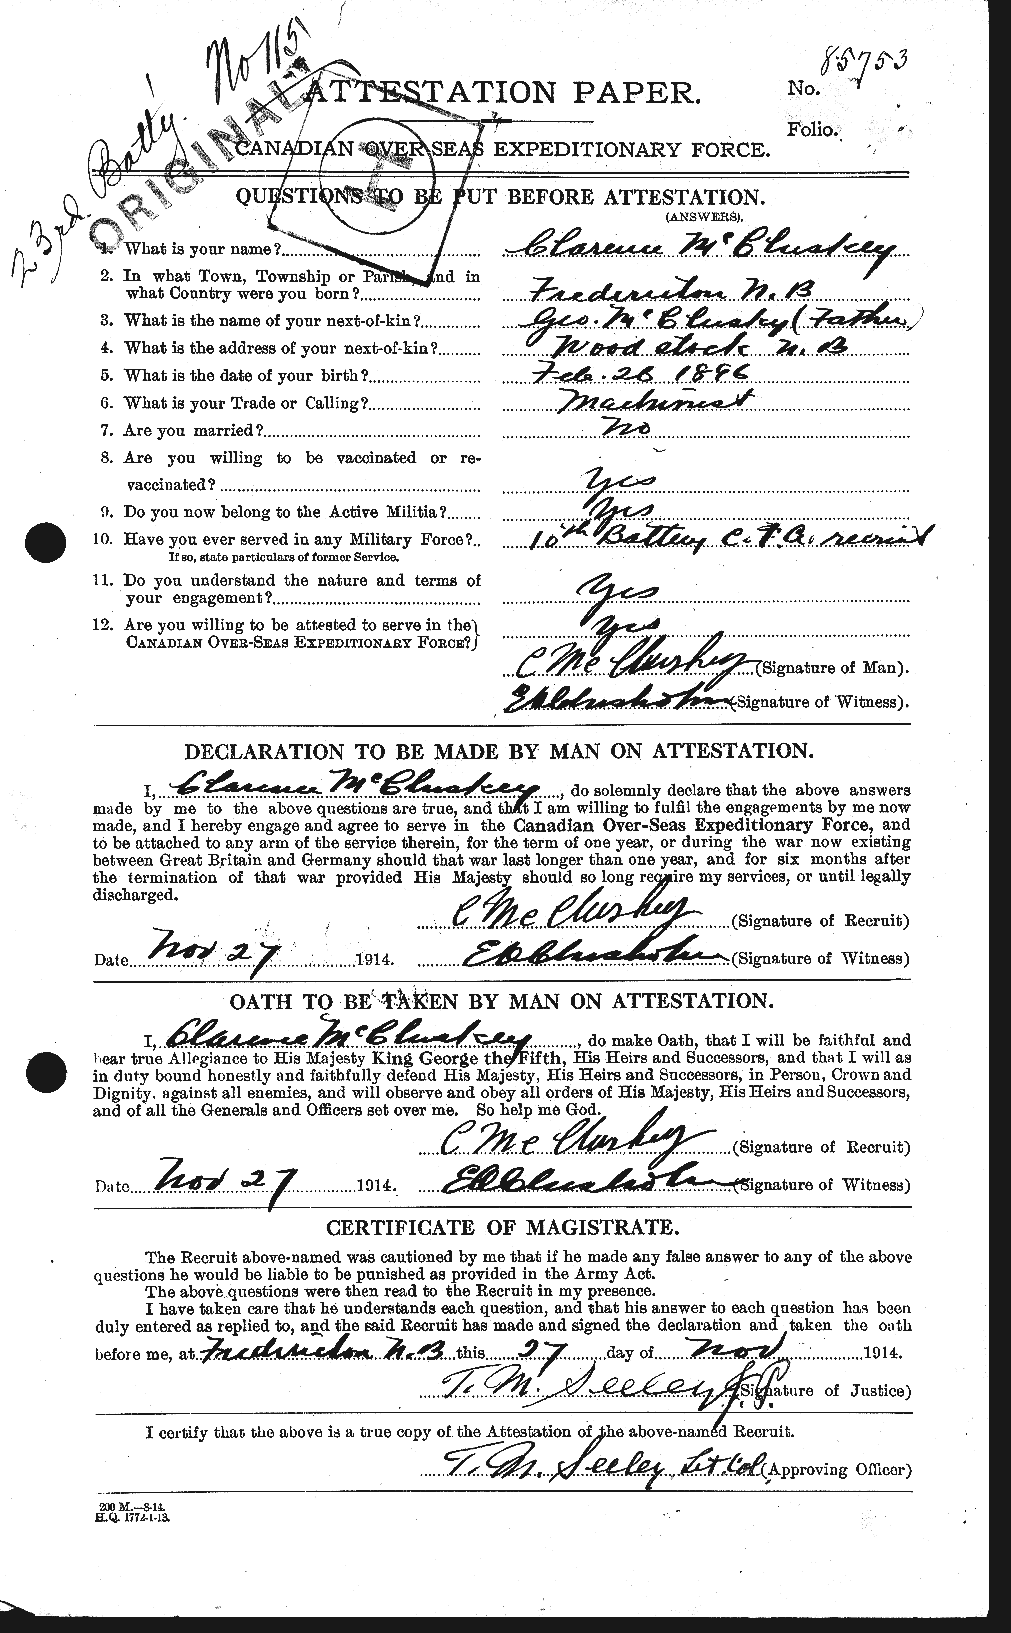 Personnel Records of the First World War - CEF 133656a